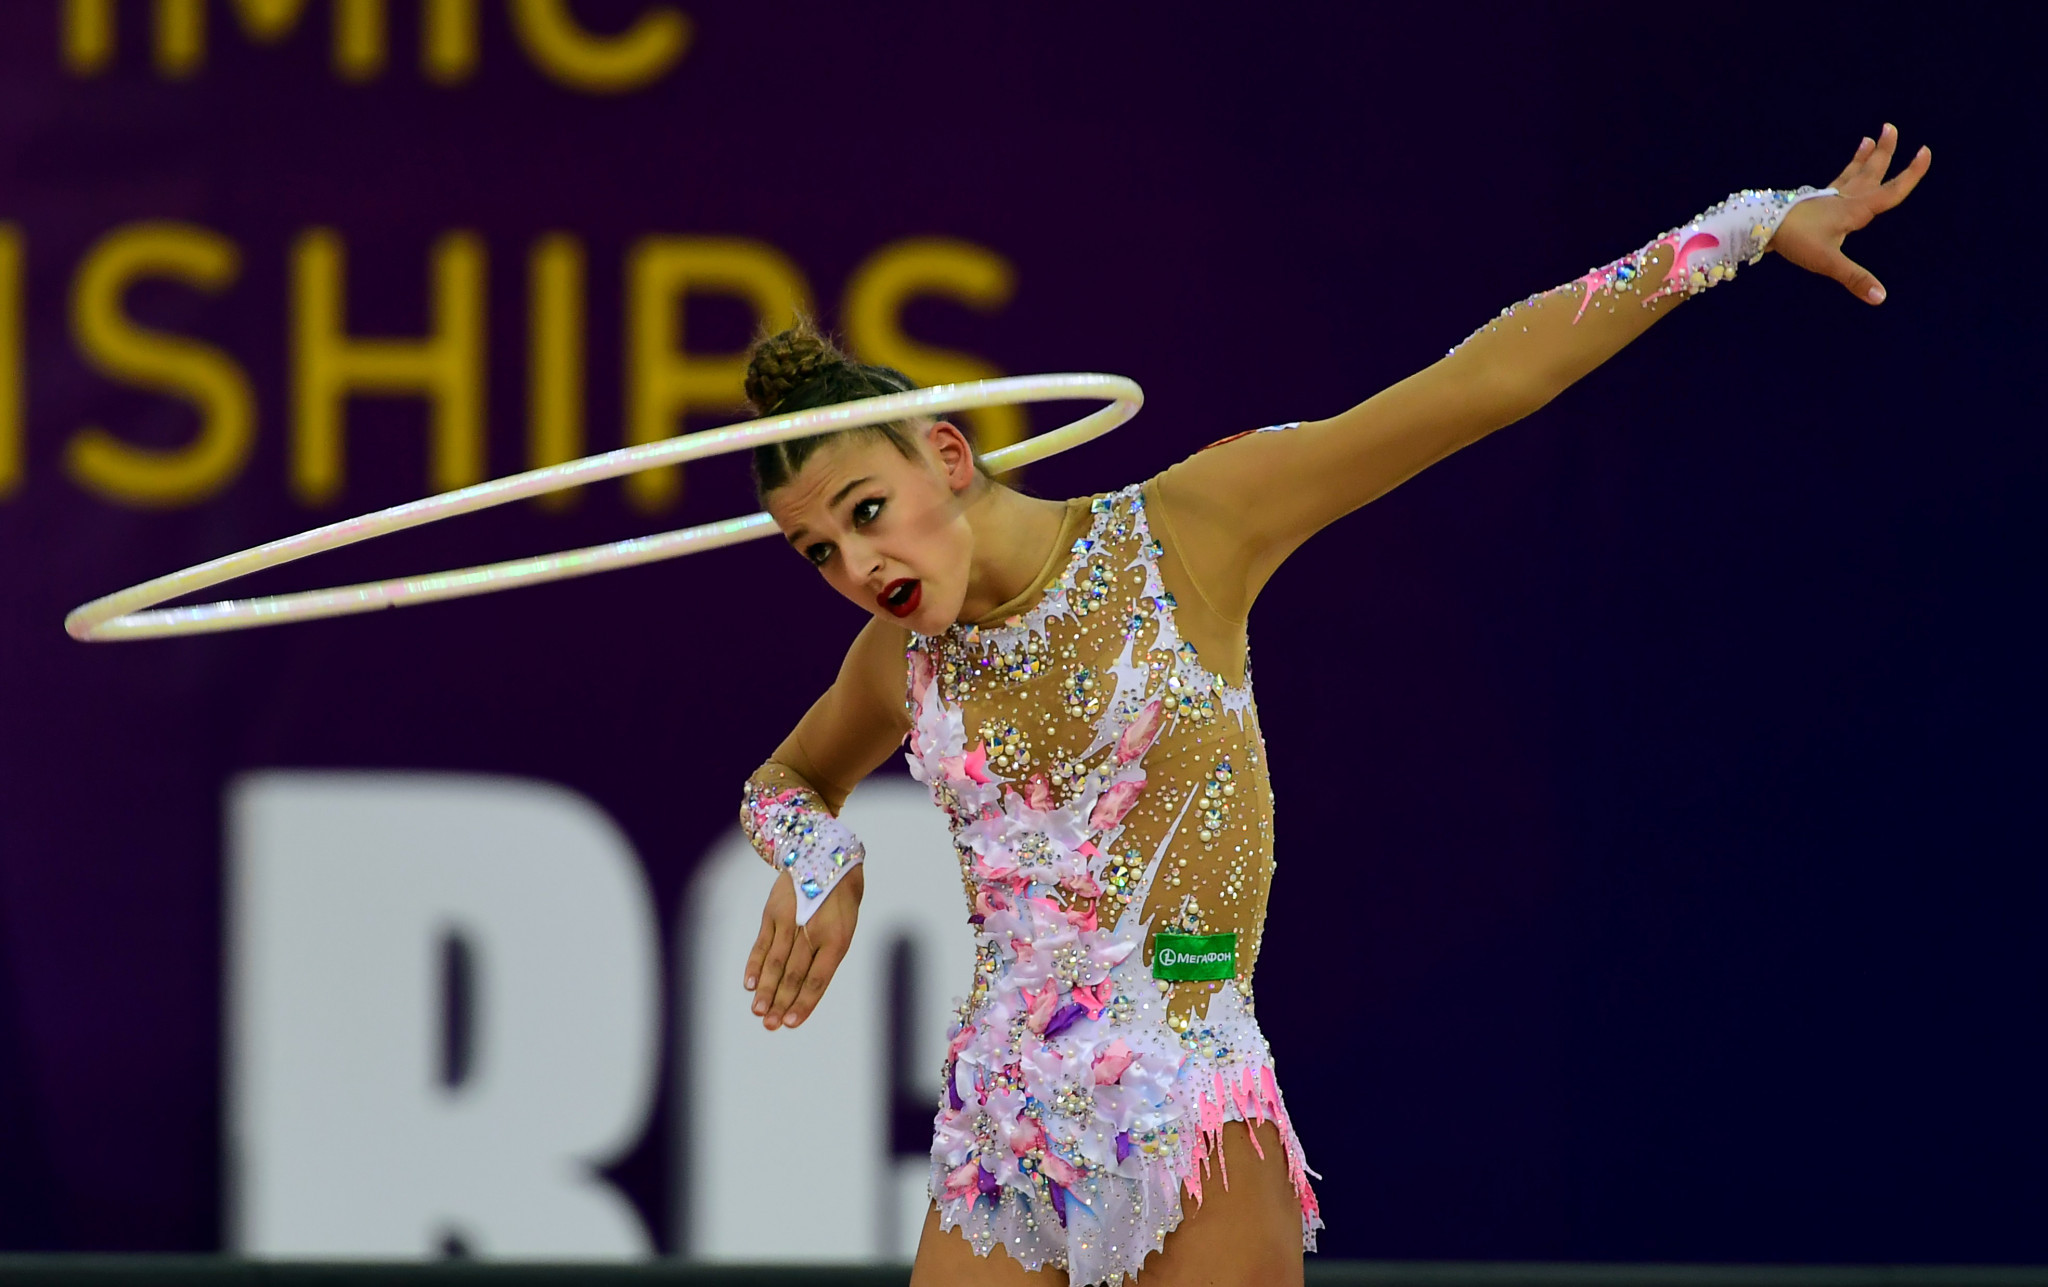 Russia's Aleksandra Soldatova finished on the podium in several disciplines in Belarus' capital city ©Getty Images